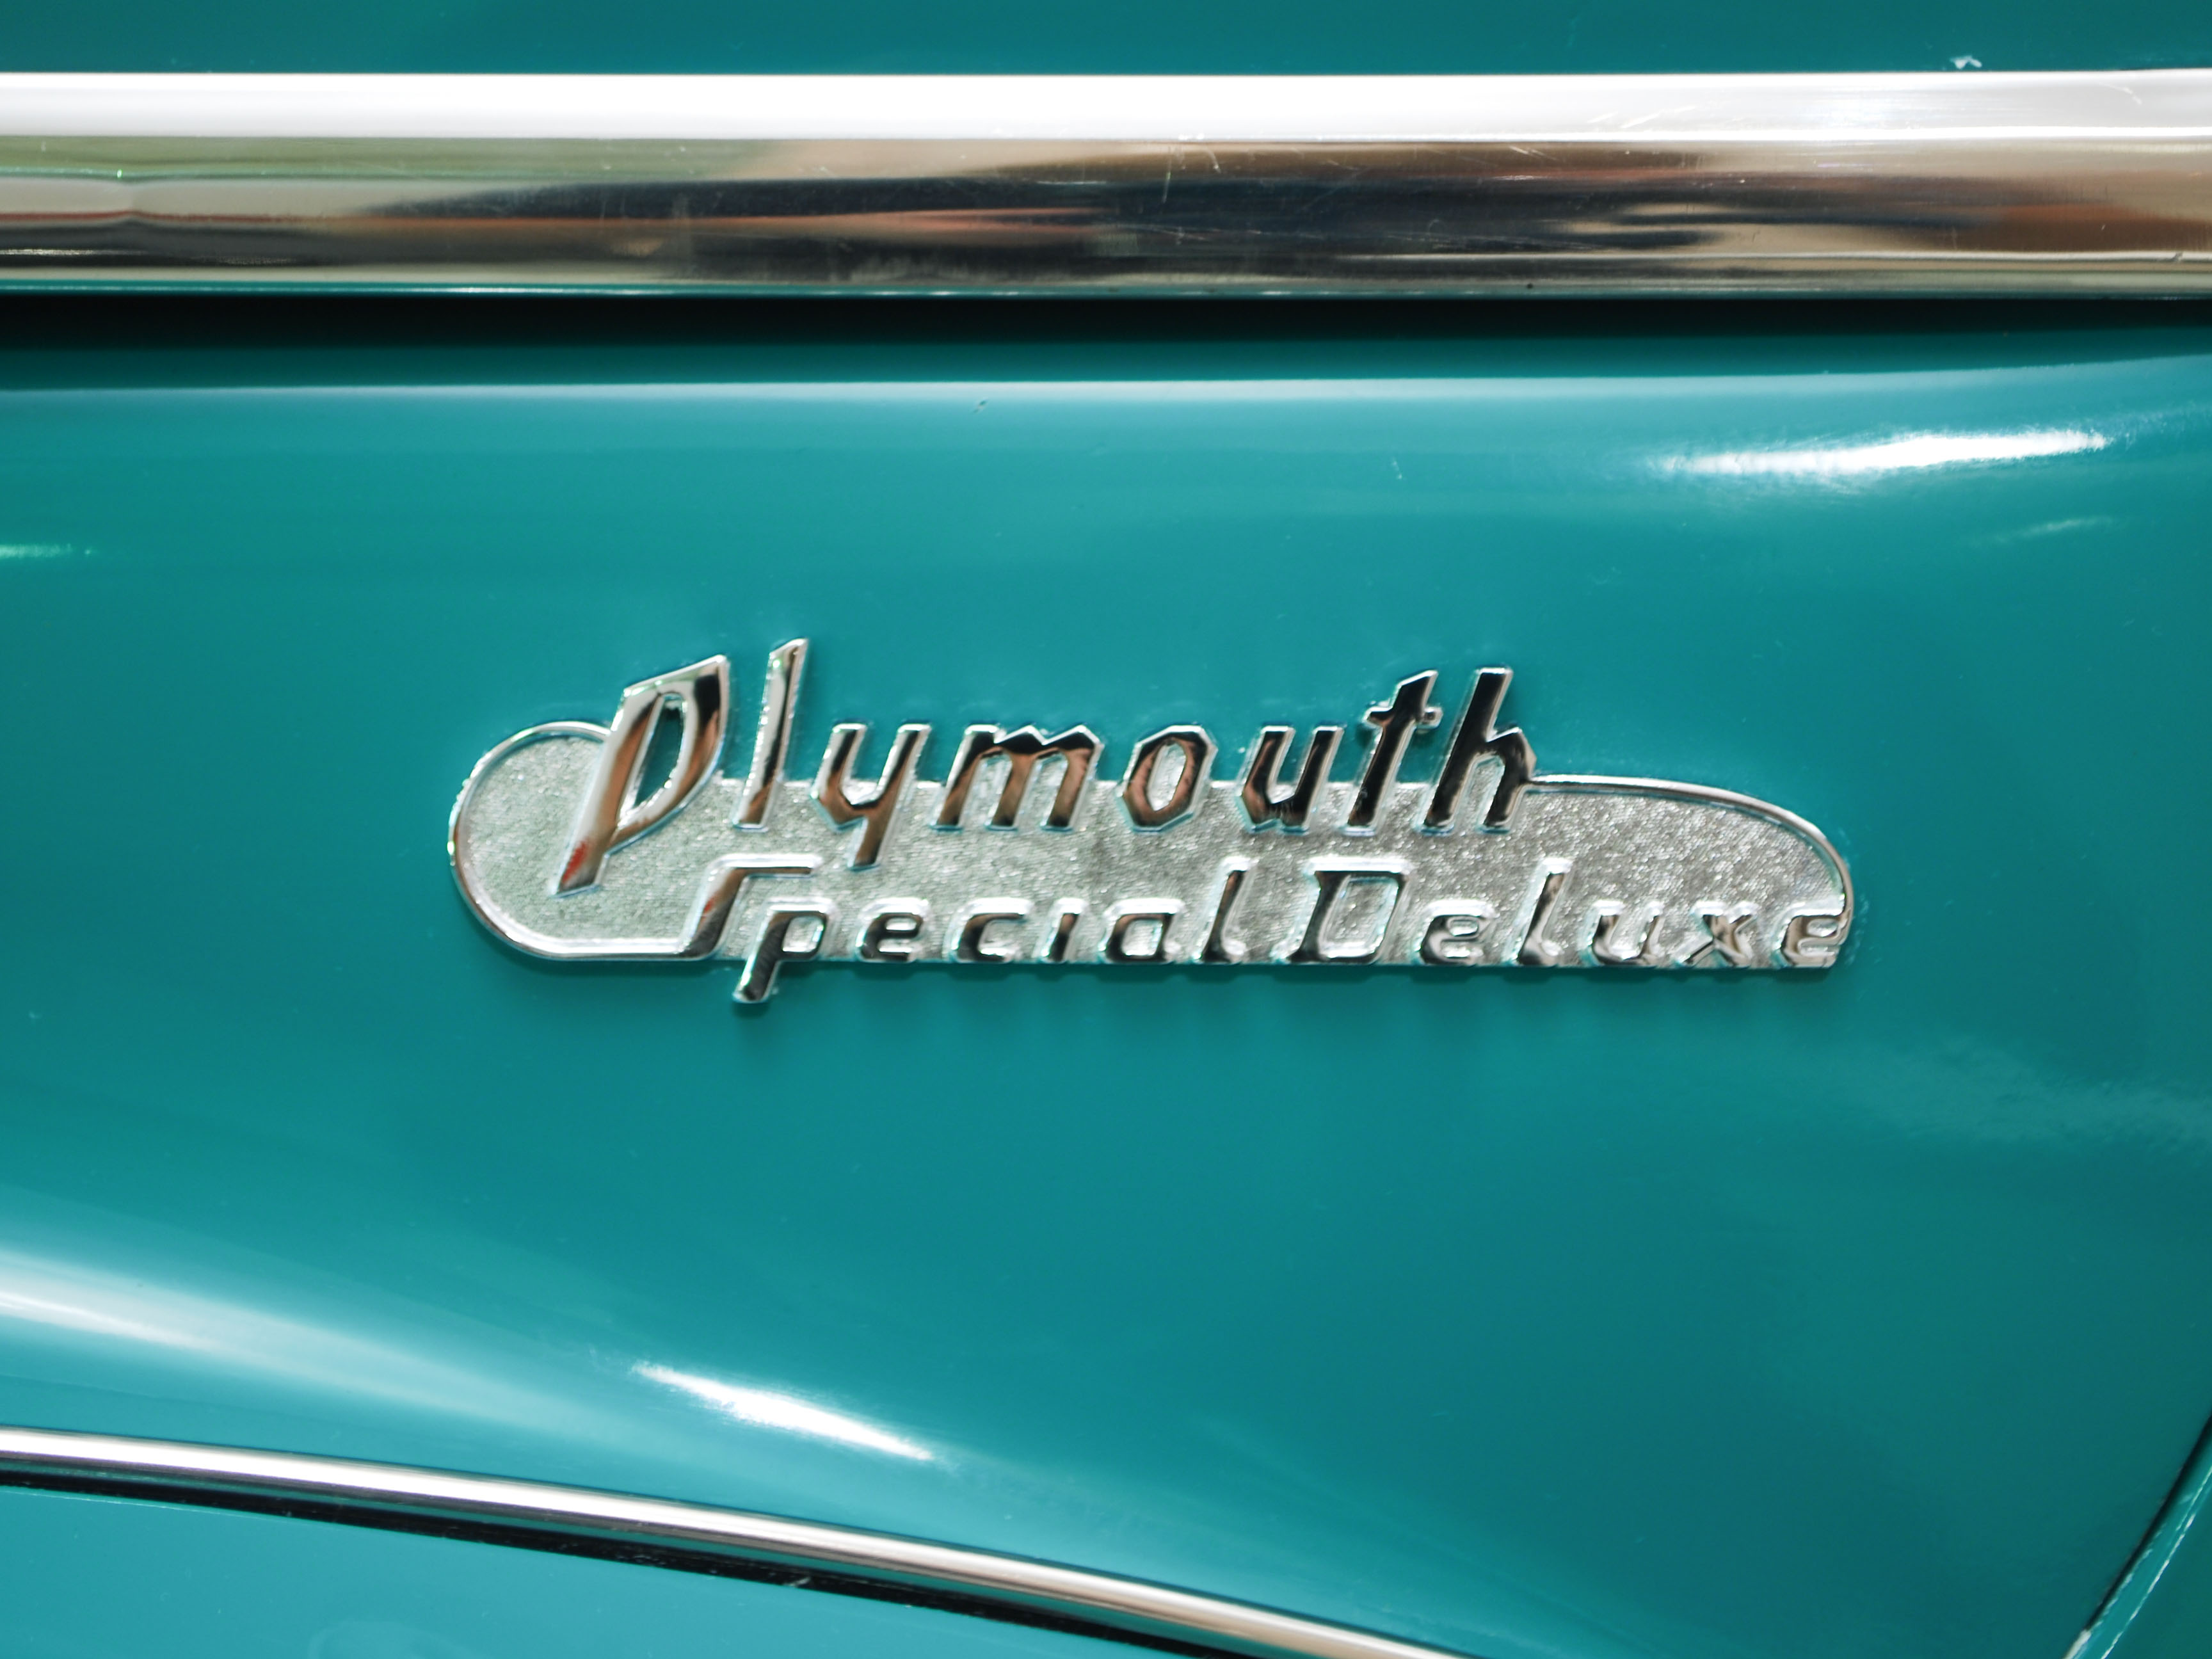 1942 plymouth p14c special deluxe